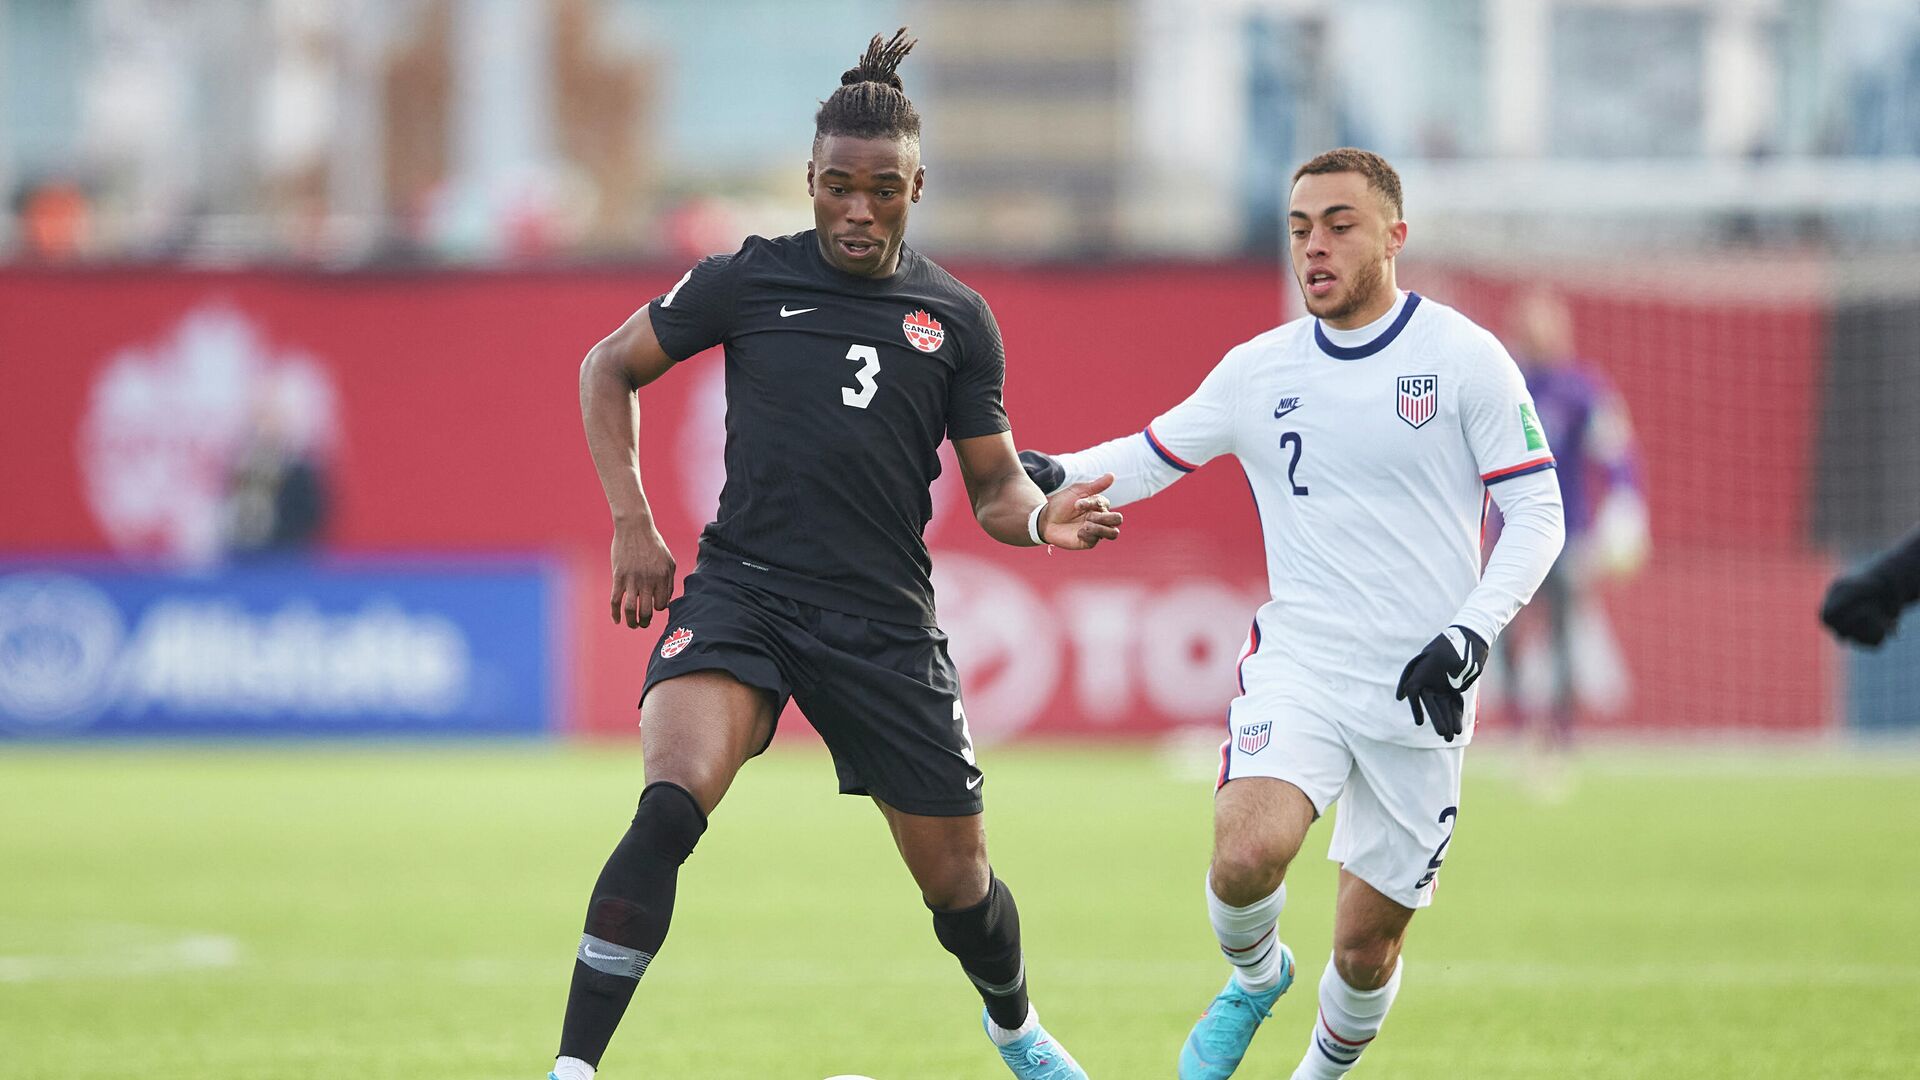 Canada’s Sam Adekugbe (L) controls the ball as he is guarded by the United States’ Sergiсo Dest during the World Cup qualifying match between Canada and the United States in Hamilton, Ontario, on January 30, 2022. (Photo by Geoff Robins / AFP) - РИА Новости, 1920, 31.01.2022